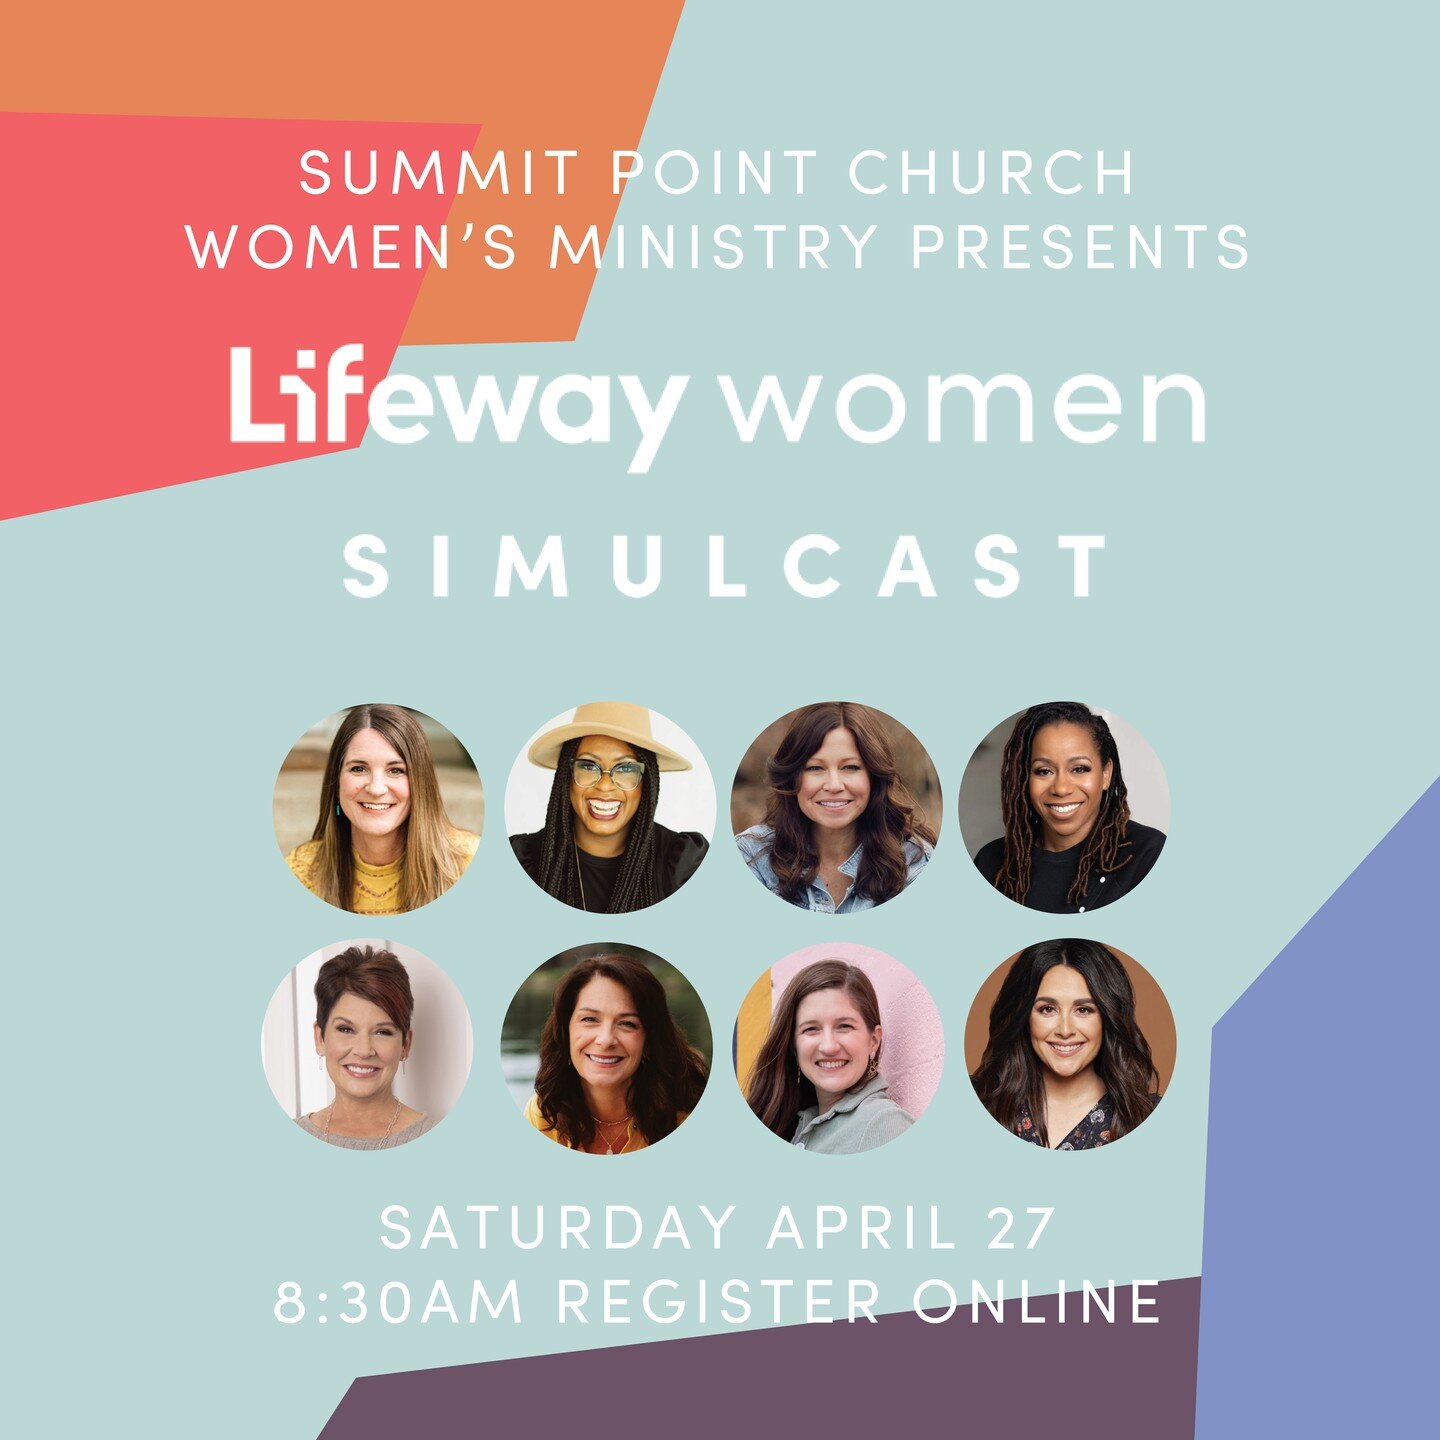 All women, ages 17 and up are invited to join us on Saturday, April 27, 2024 from 8:30am &ndash; 4:30pm at Summit Point Church for a Telecast Conference. The cost is $30 lunch included. Register on our website by April 24th.